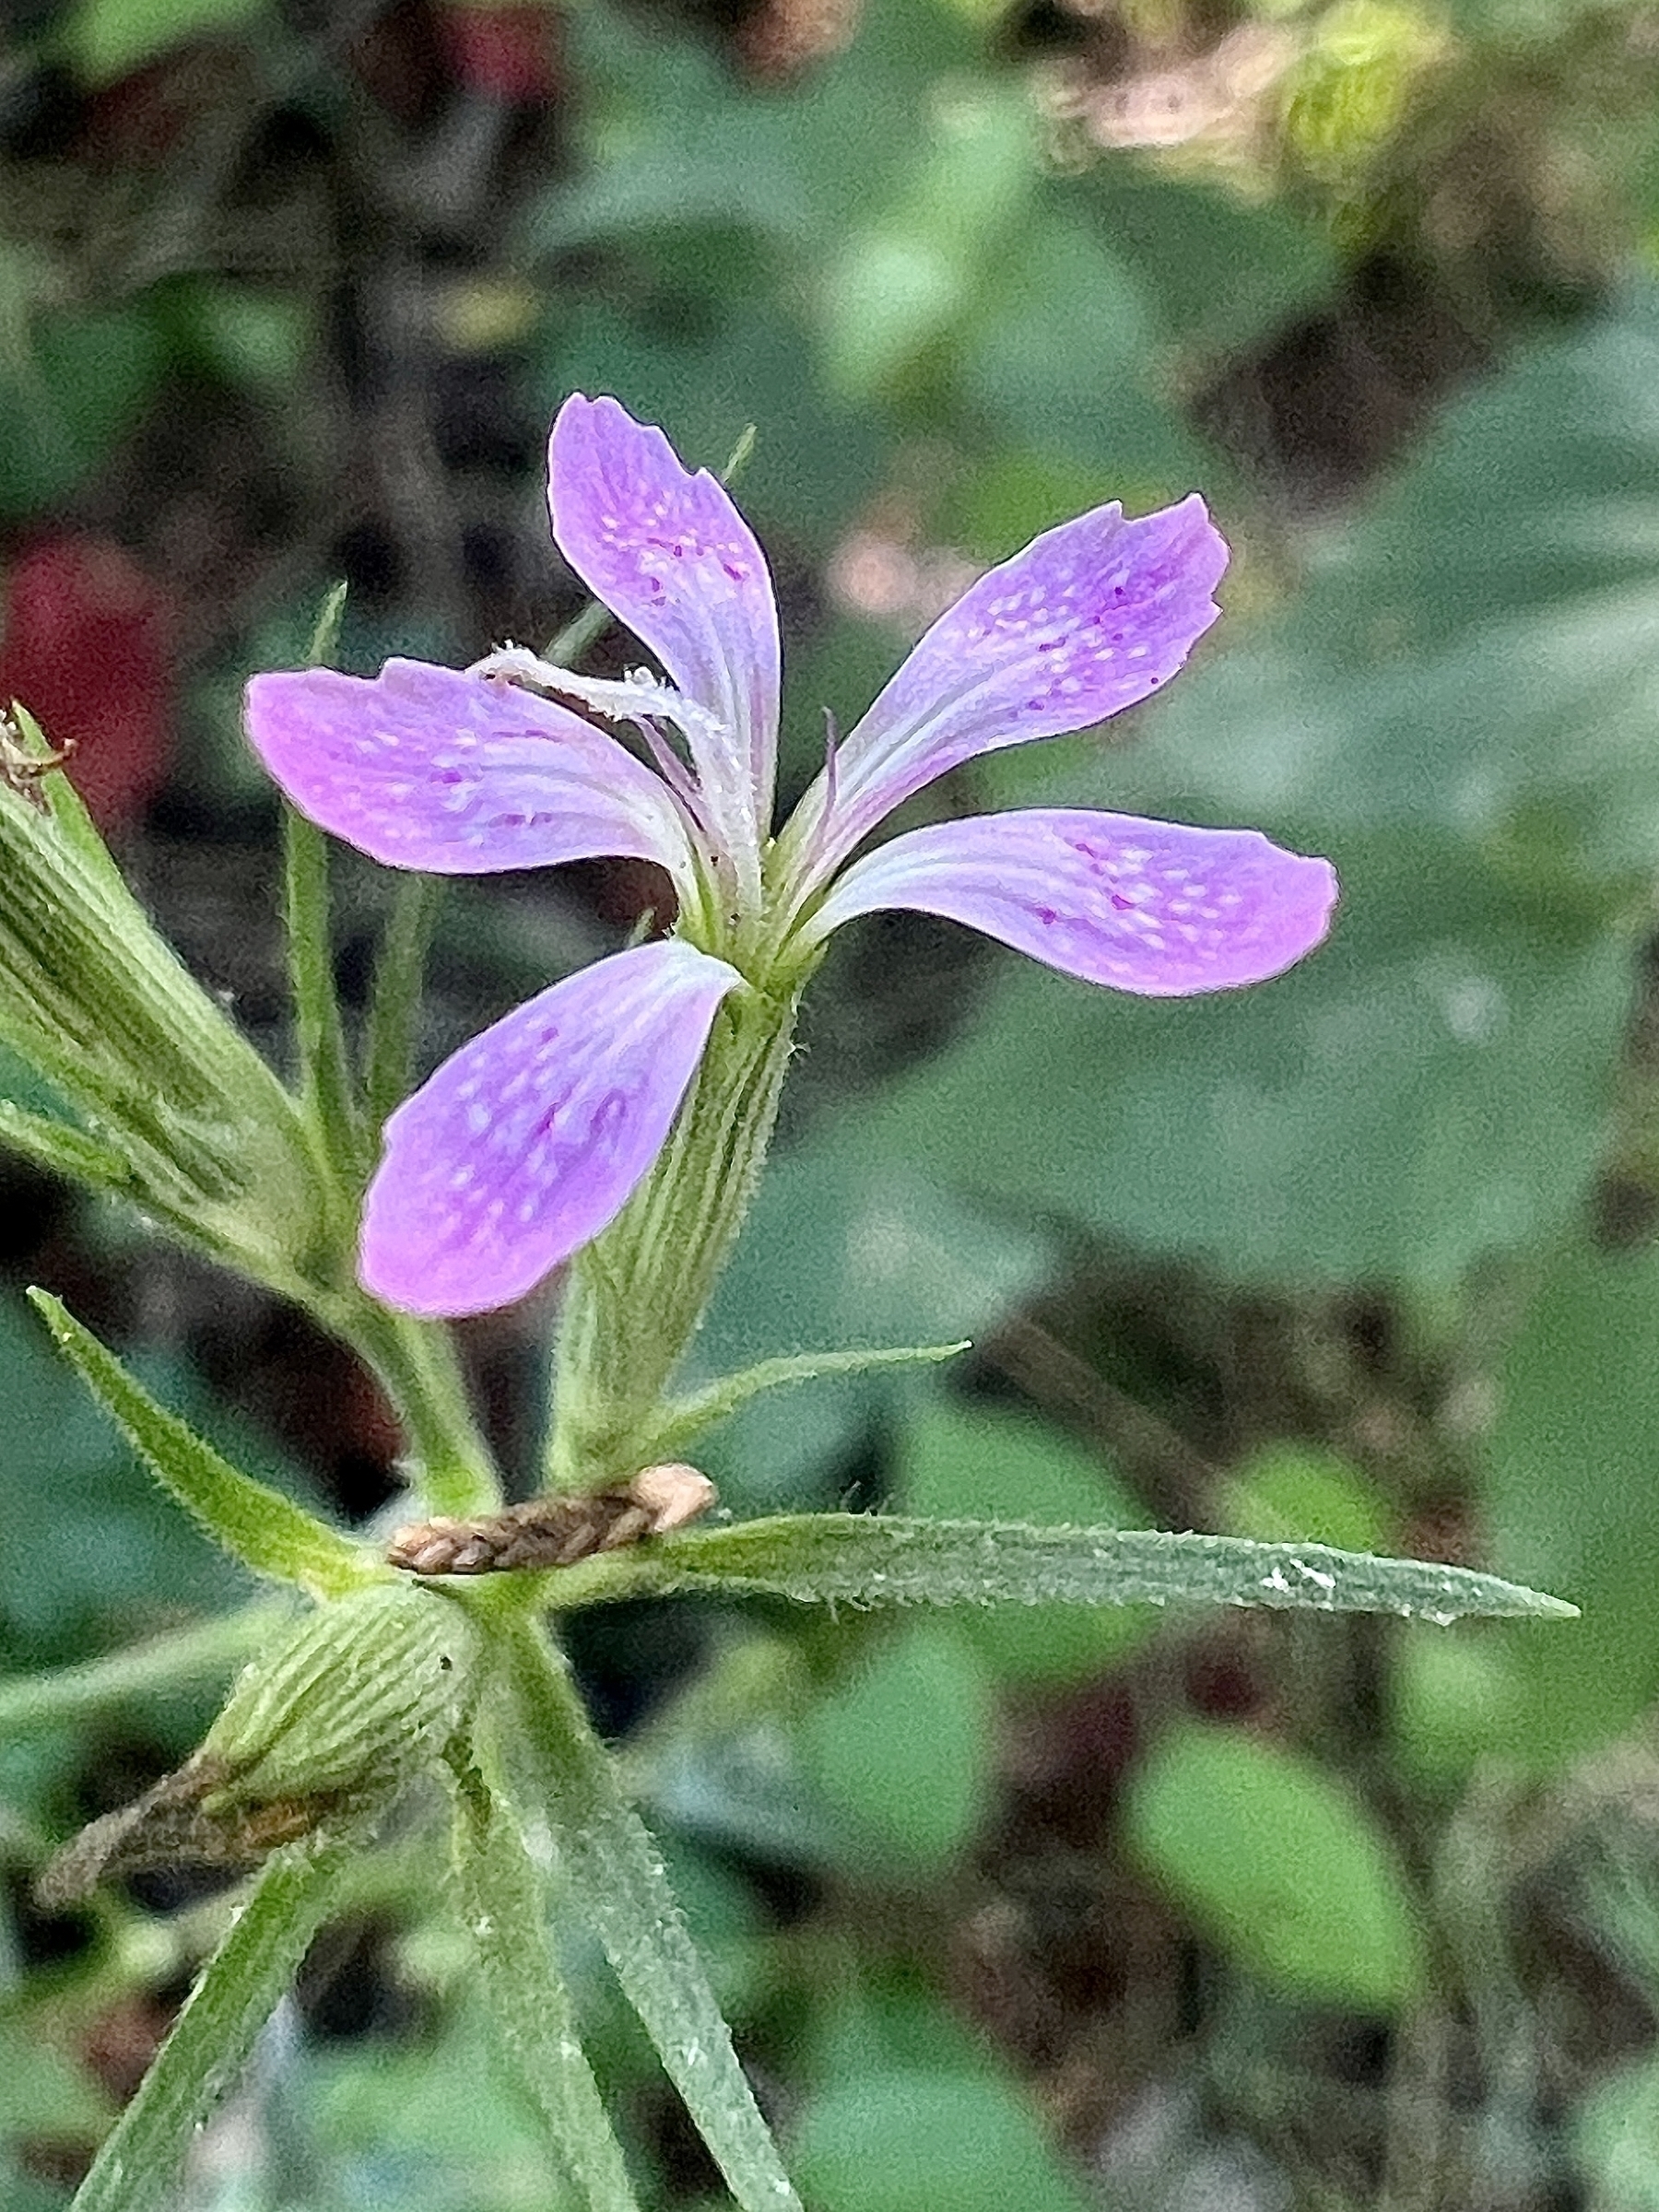 A very small 5 petaled flower. The petals are darker pink on the outer portions, gradually becoming lighter and almost white at the center. The background is blurred greed leaves of the forest floor.